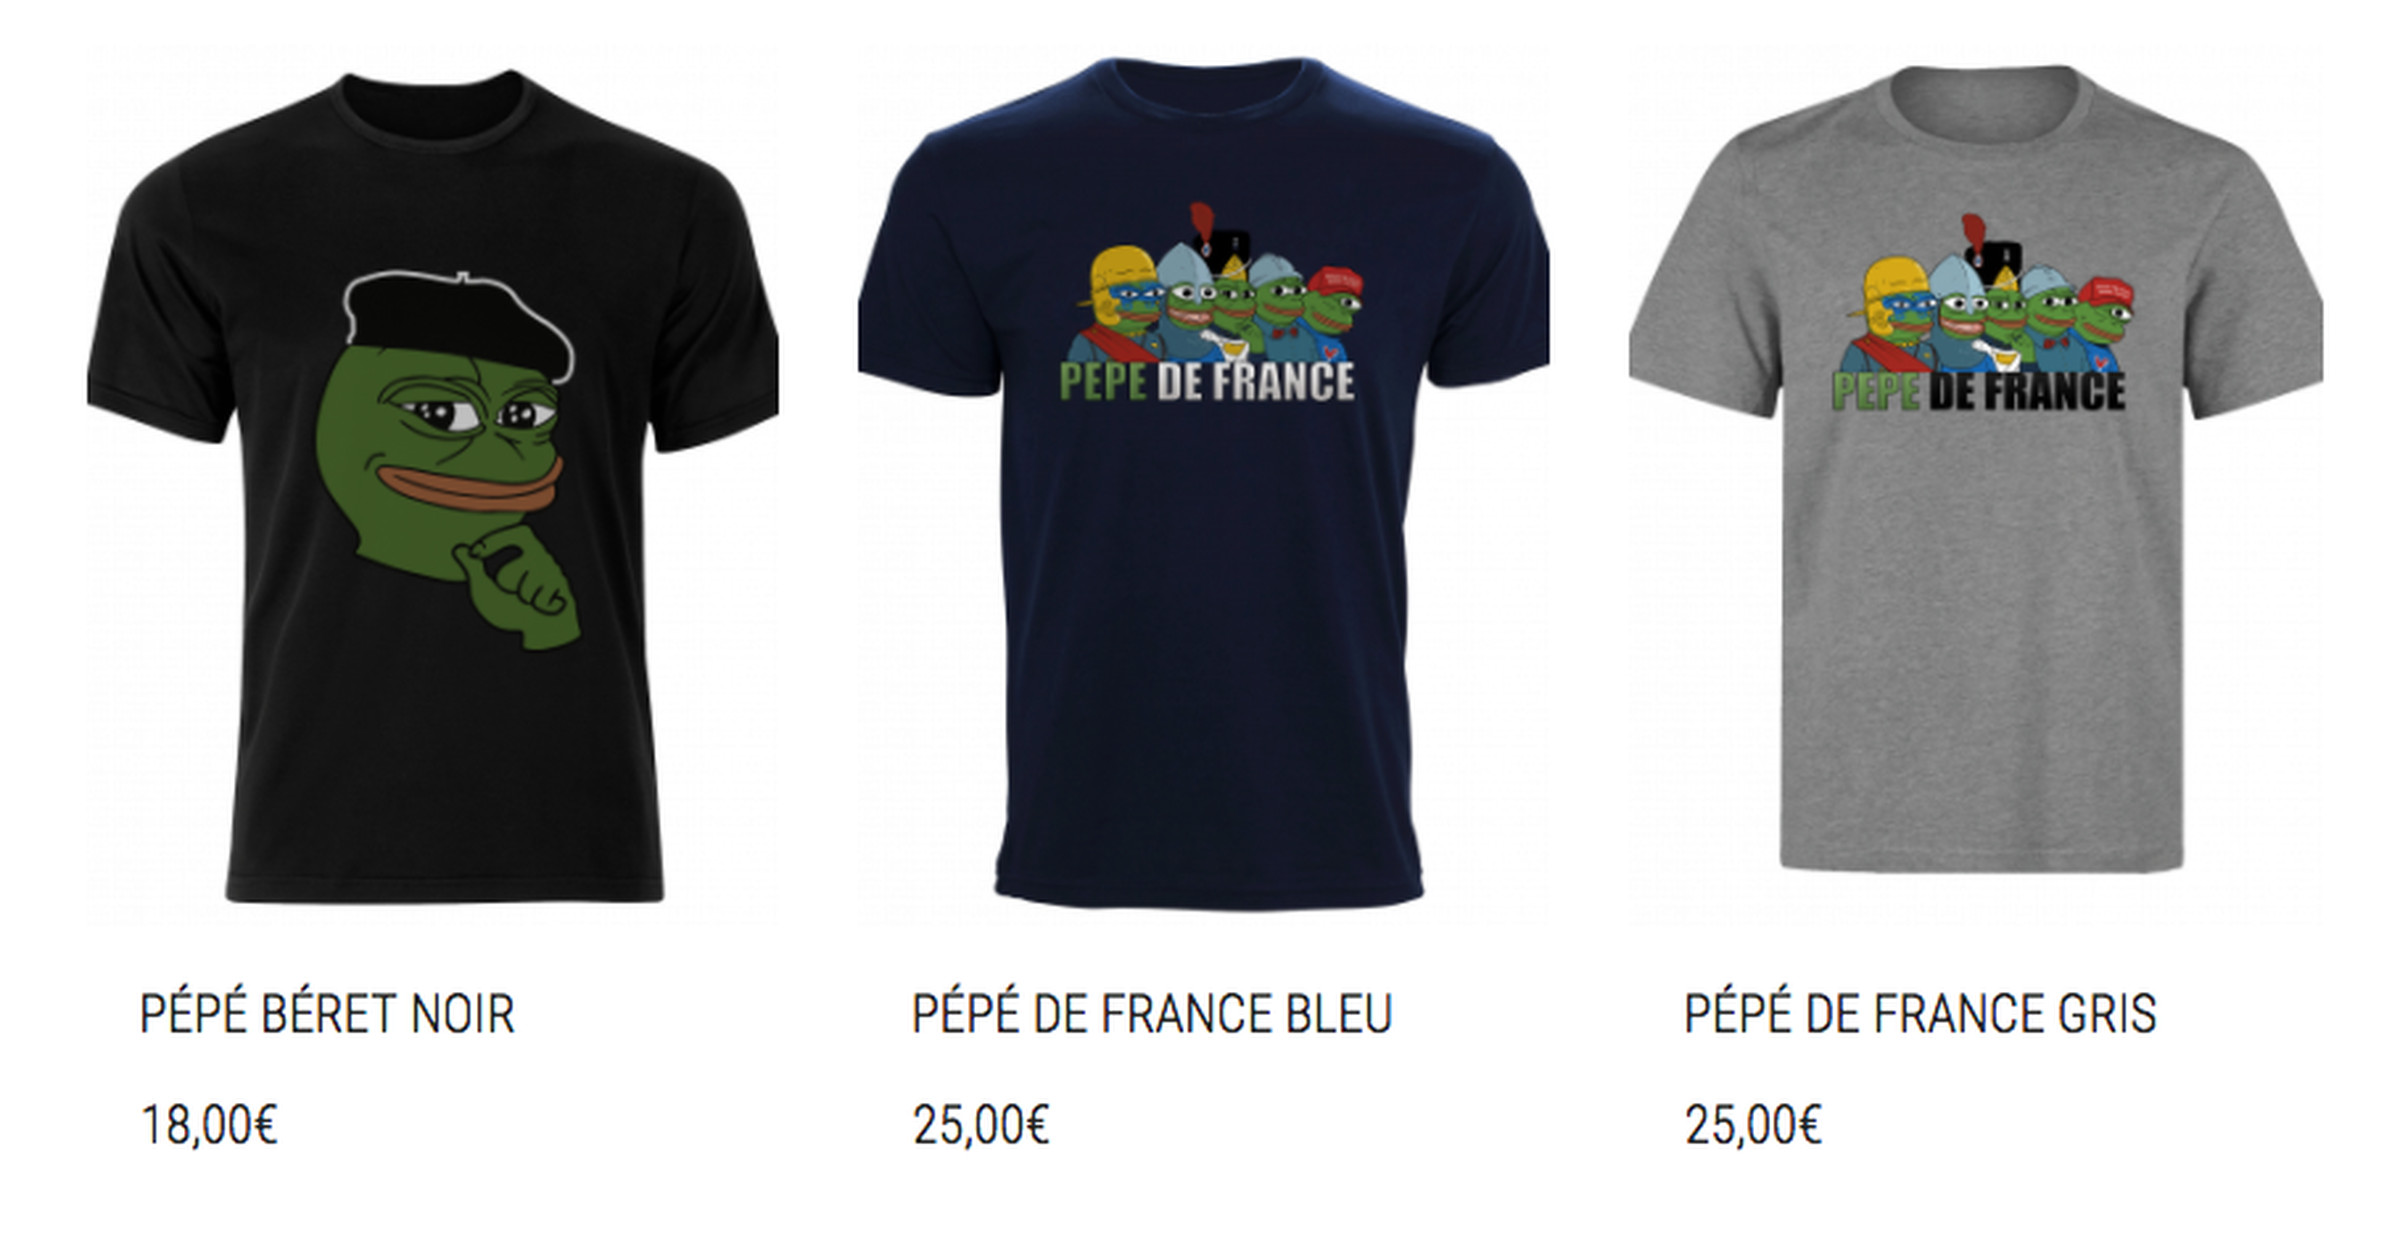 Screenshot of Pepe t-shirts sold on the website Bonne Dégaine.